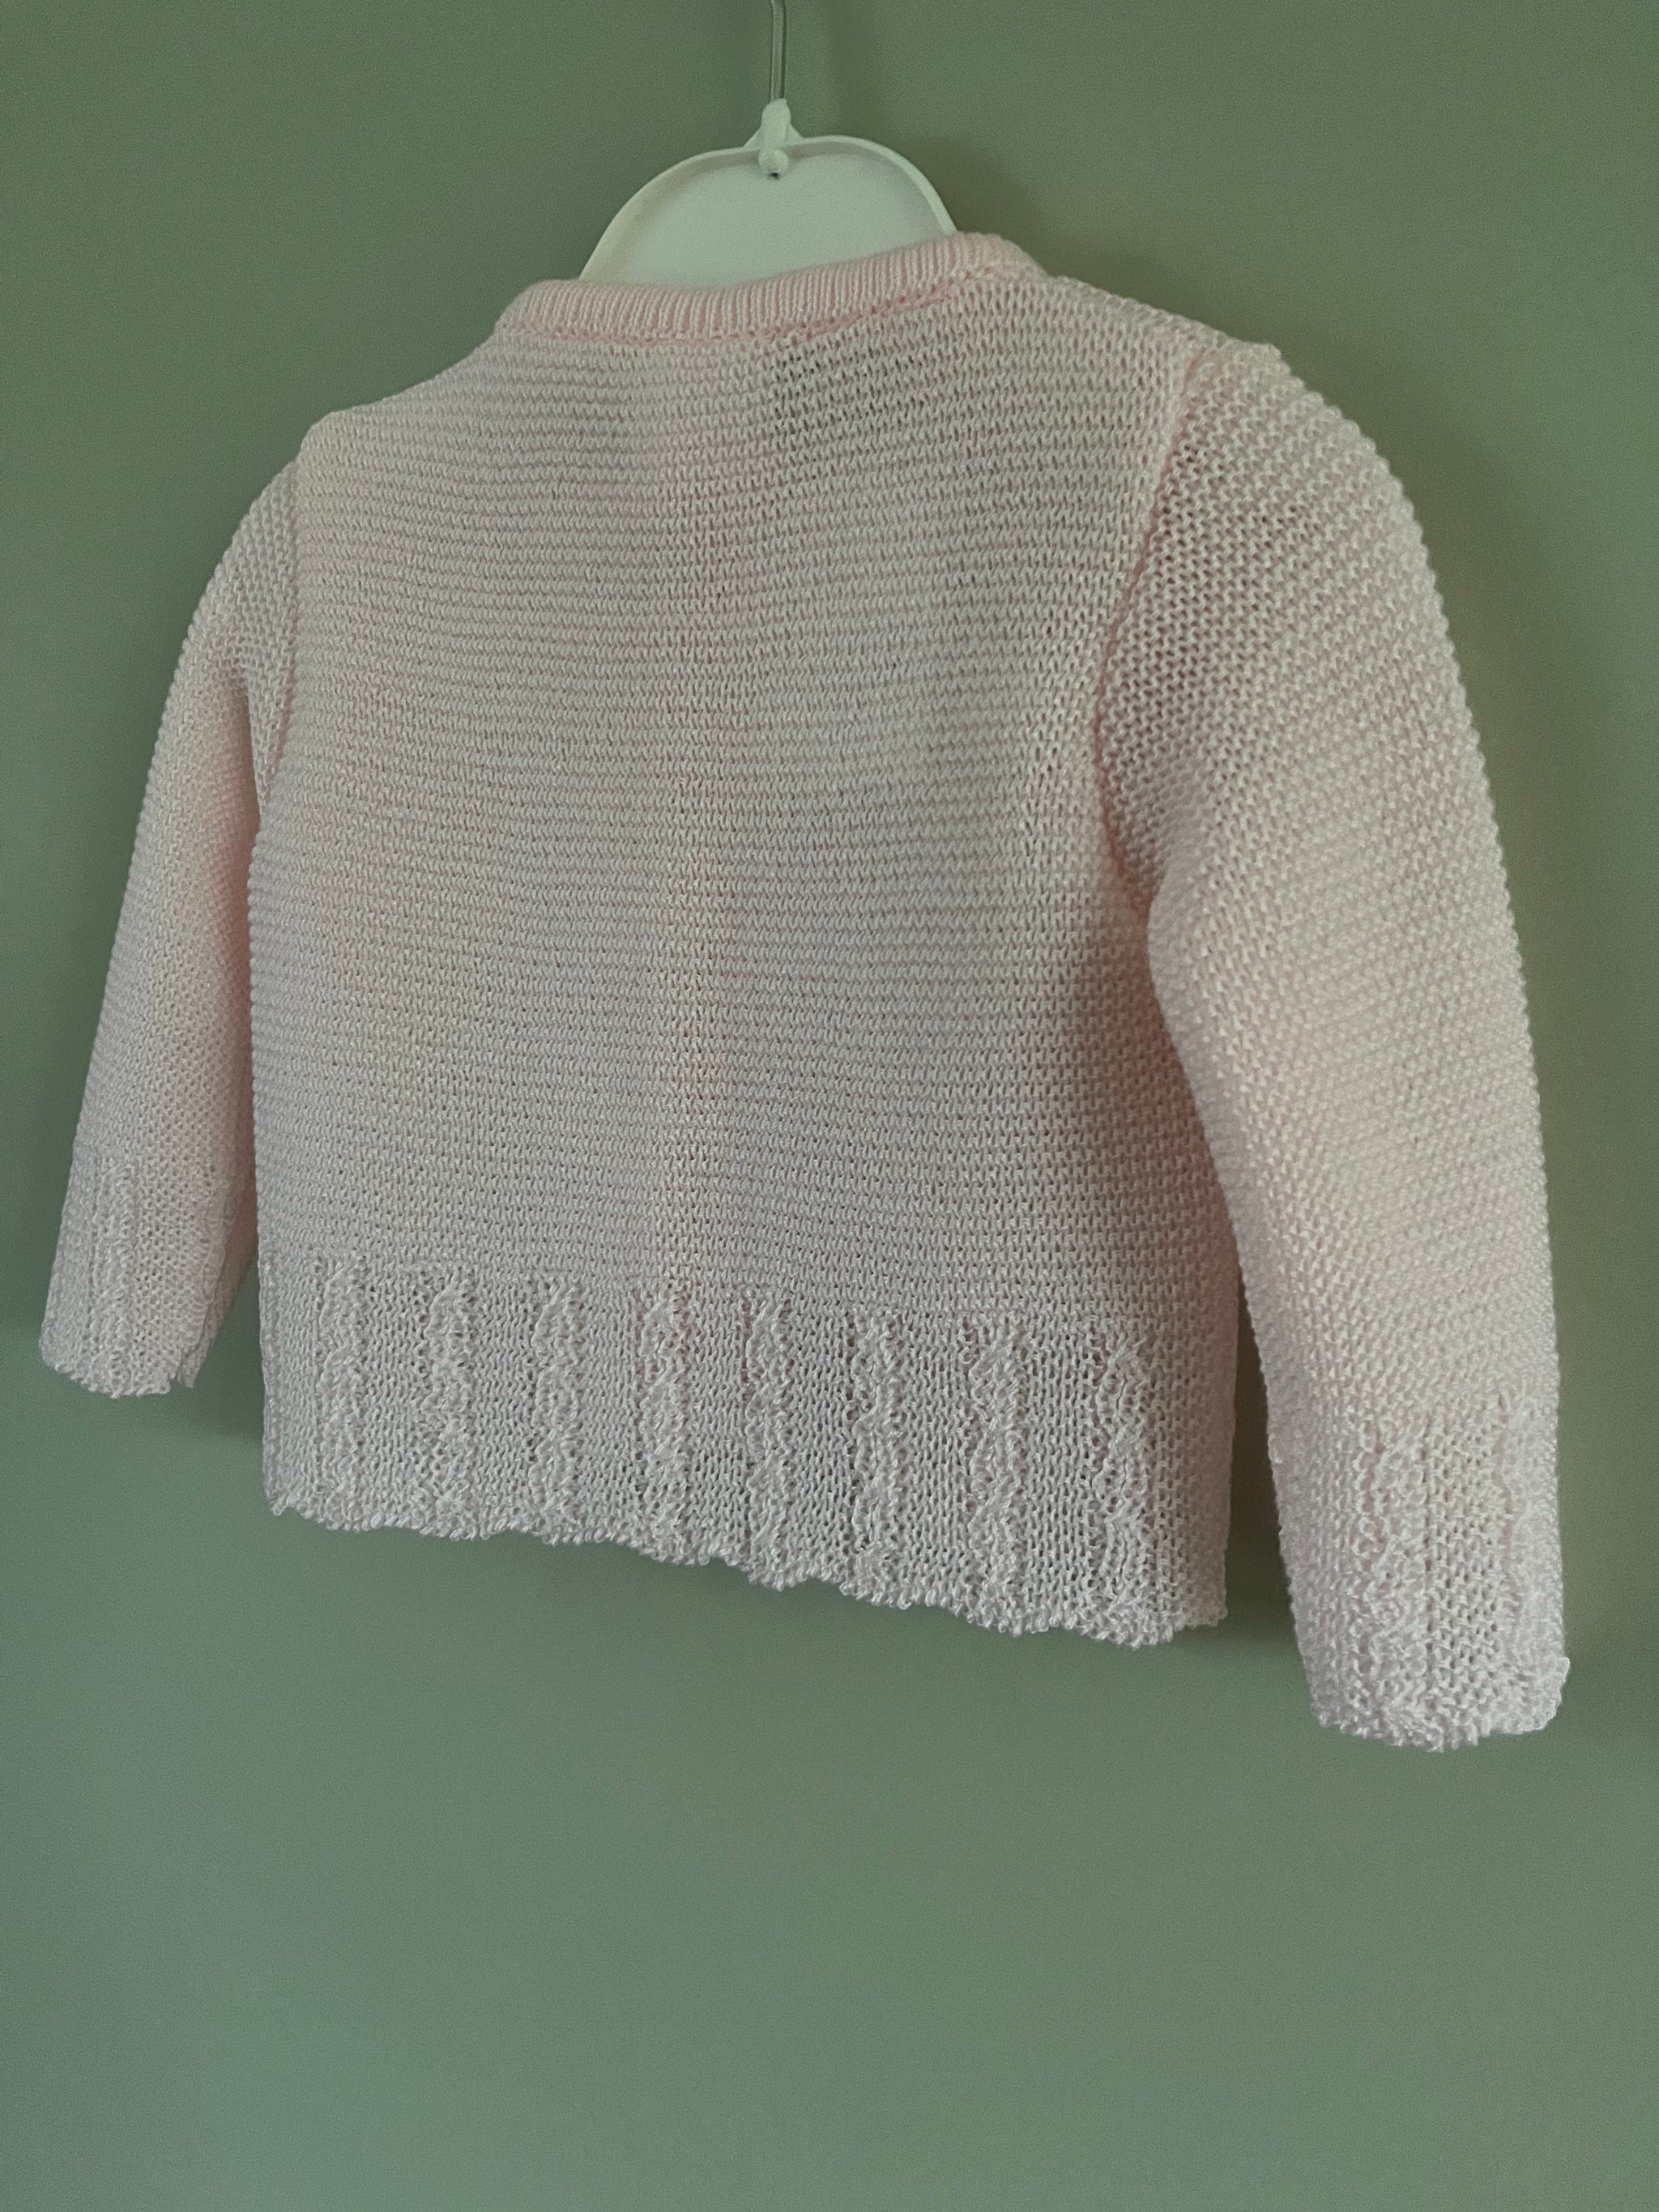 Baby Pink Scallop Edged Cardigan Traditional  Little Nosh